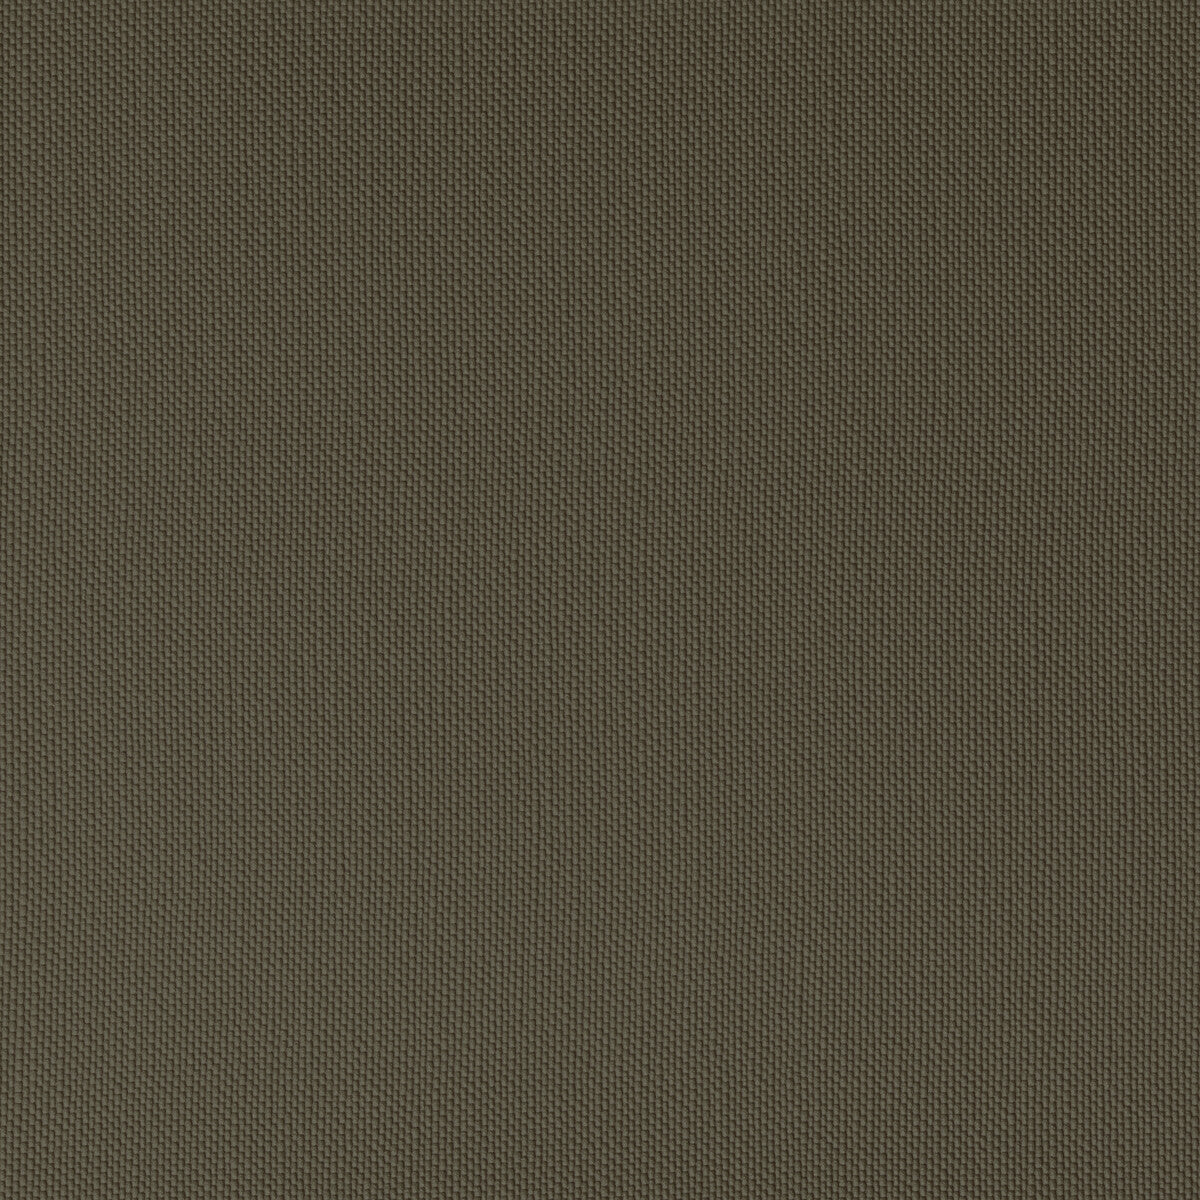 Ventura fabric in bronze color - pattern VENTURA.630.0 - by Kravet Contract in the Foundations / Value collection